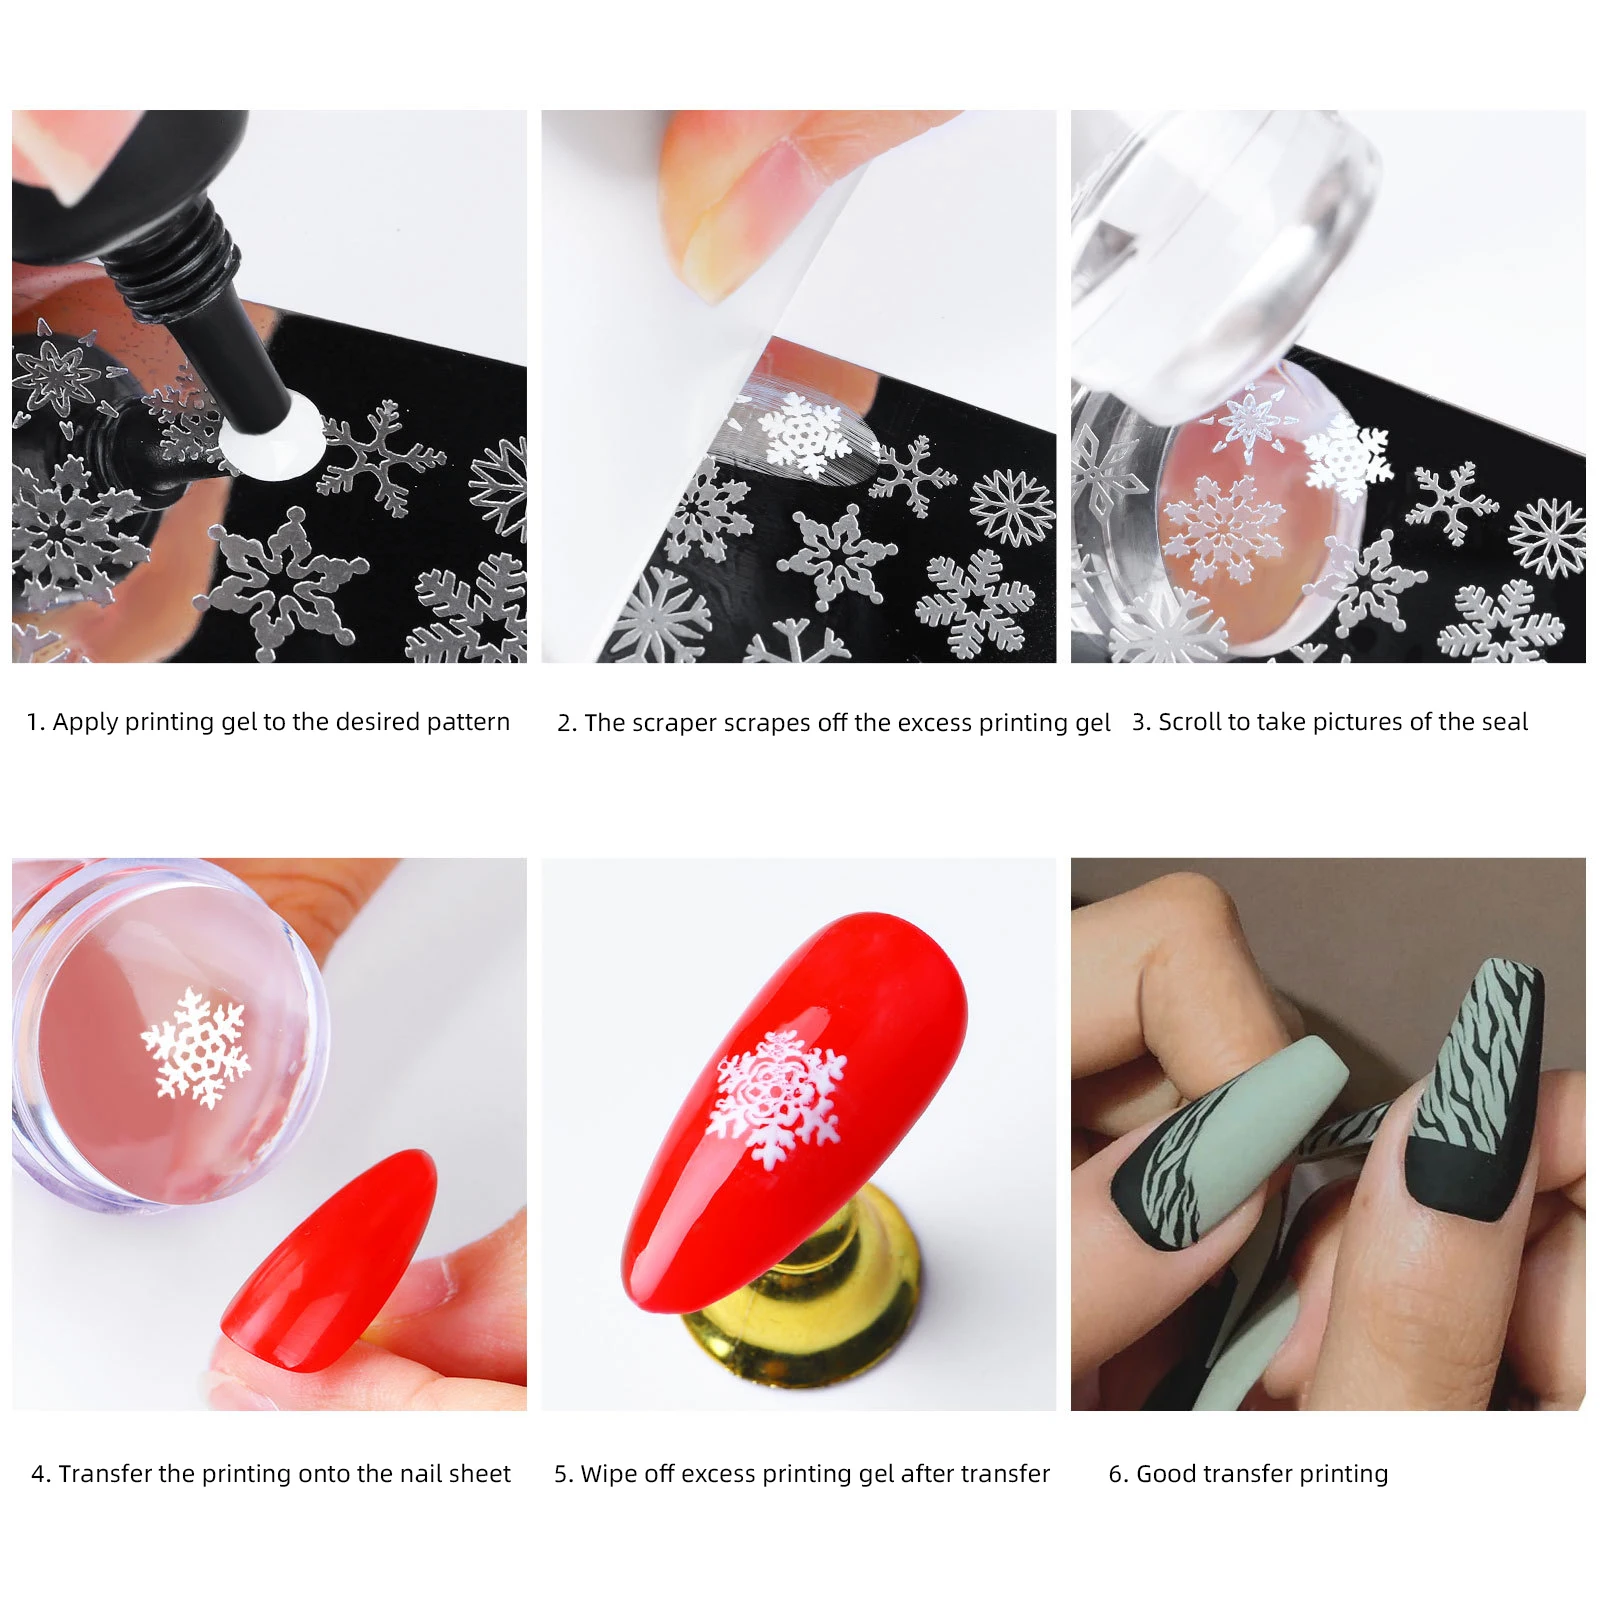 Clear Silicone Head Nail Stamp Set with Scraper to Print Patterns and Create Art Freedom,Needed Printing Gel Polish& Steel Plate 4